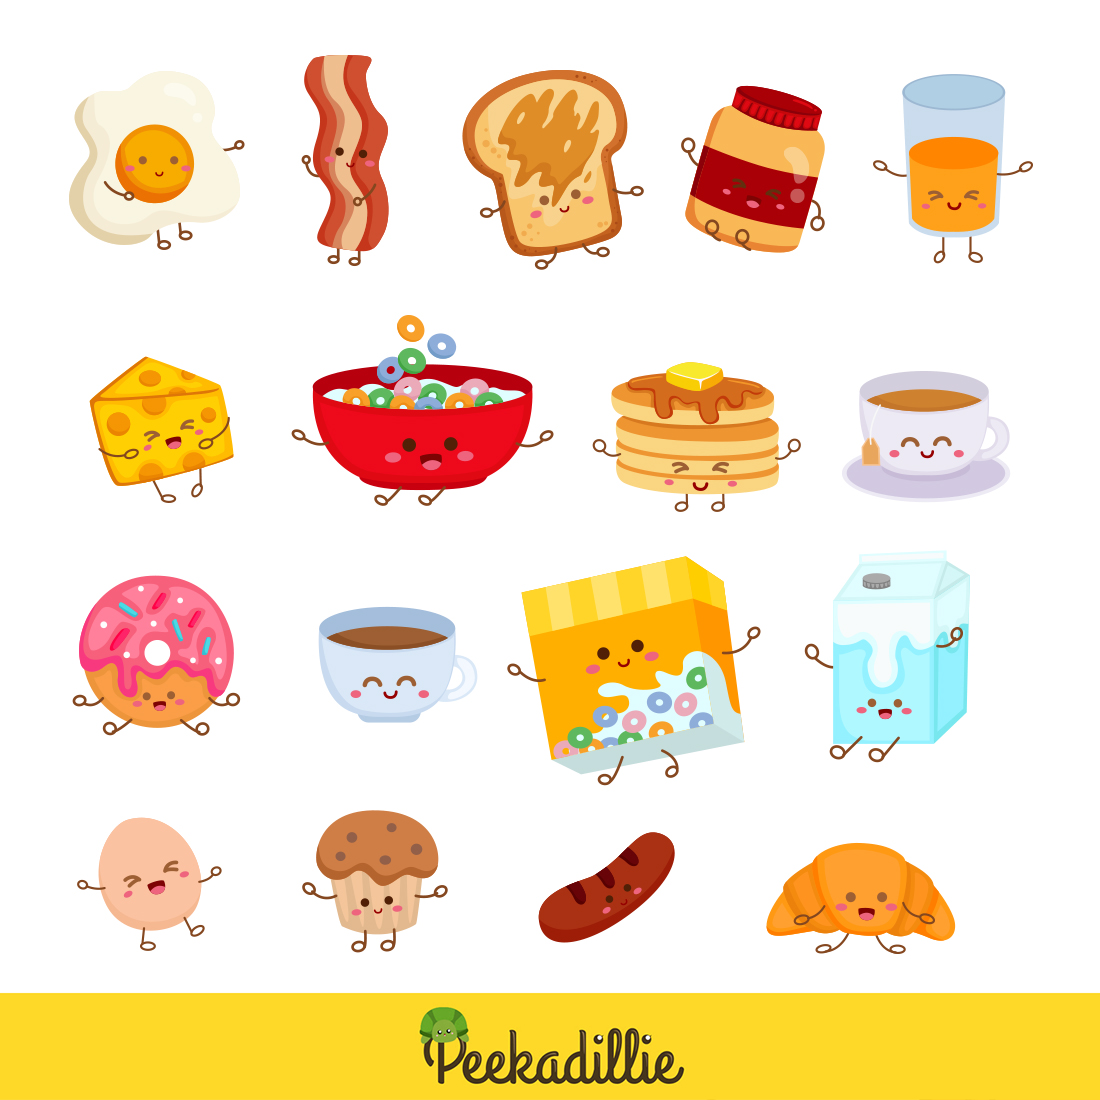 Delicious Breakfast Food and Drink Cereal Bacon Sunny Side Egg Cheese Sausage Doughnut Bread Toast Jam Tea Coffee Illustration Vector Clipart Cartoon preview image.